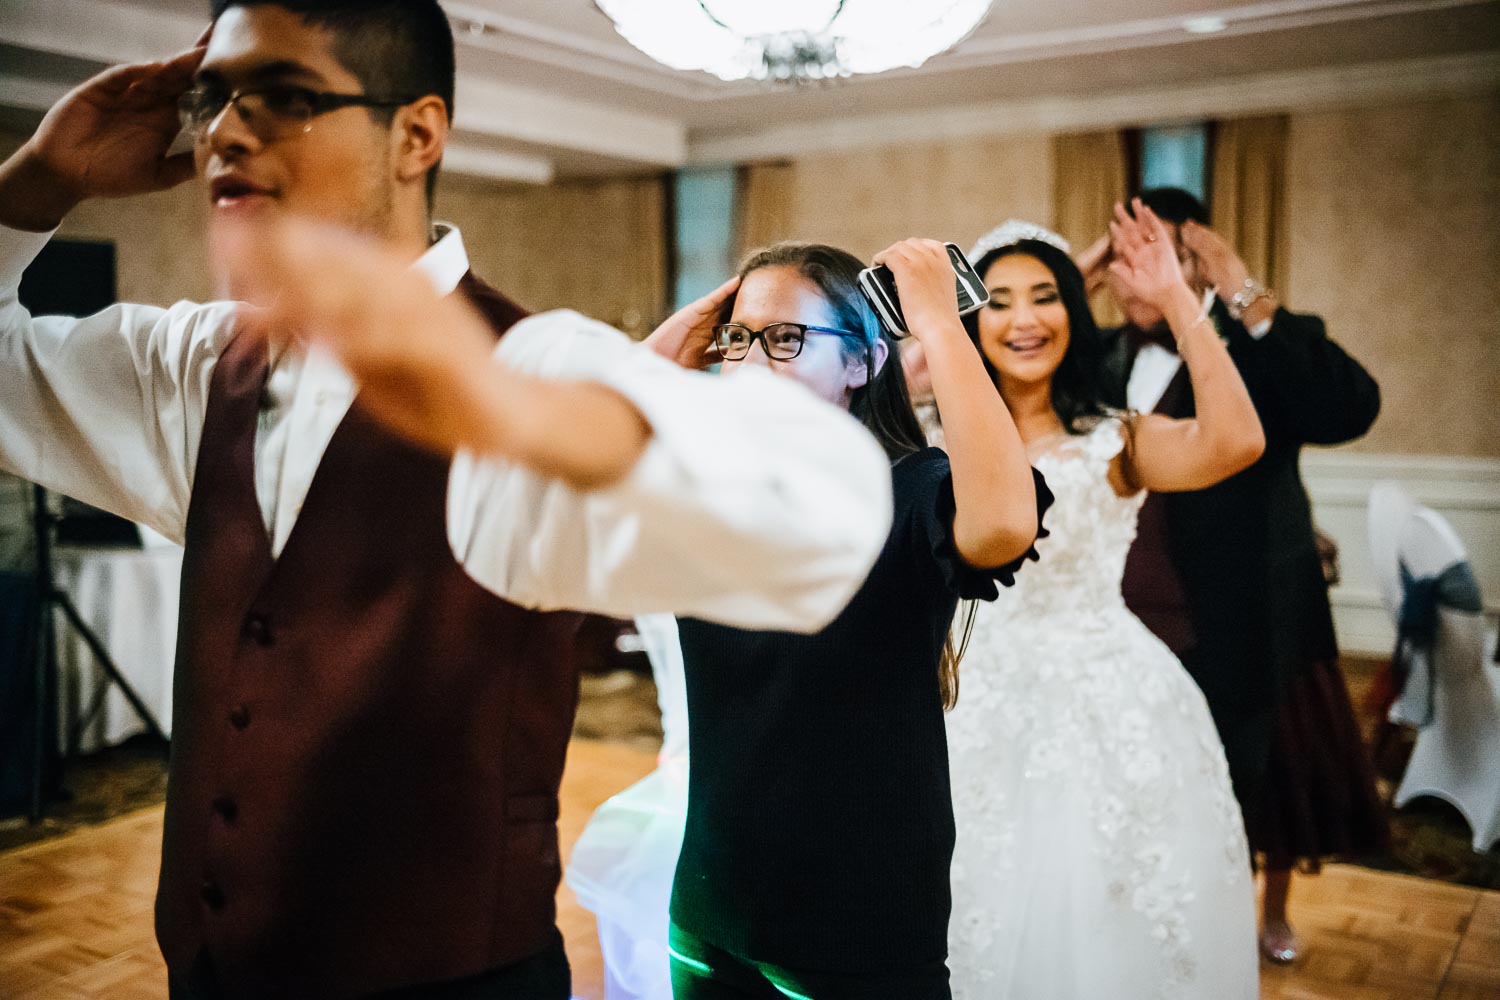 Doing the Macarena at a wedding reception